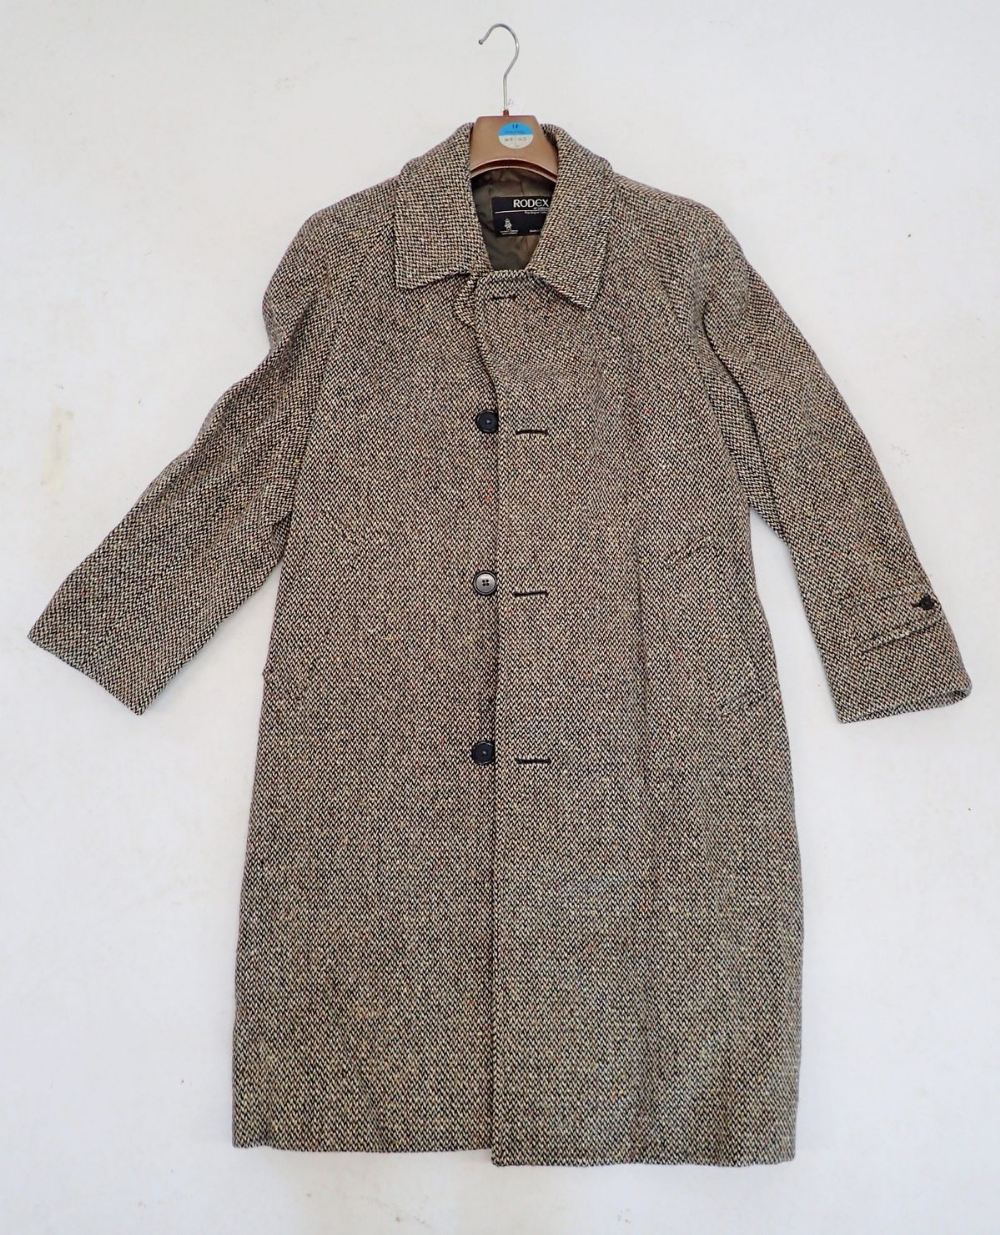 A vintage tweed men's coat by Rodex of London, label says 38 reg, chest measures 44"